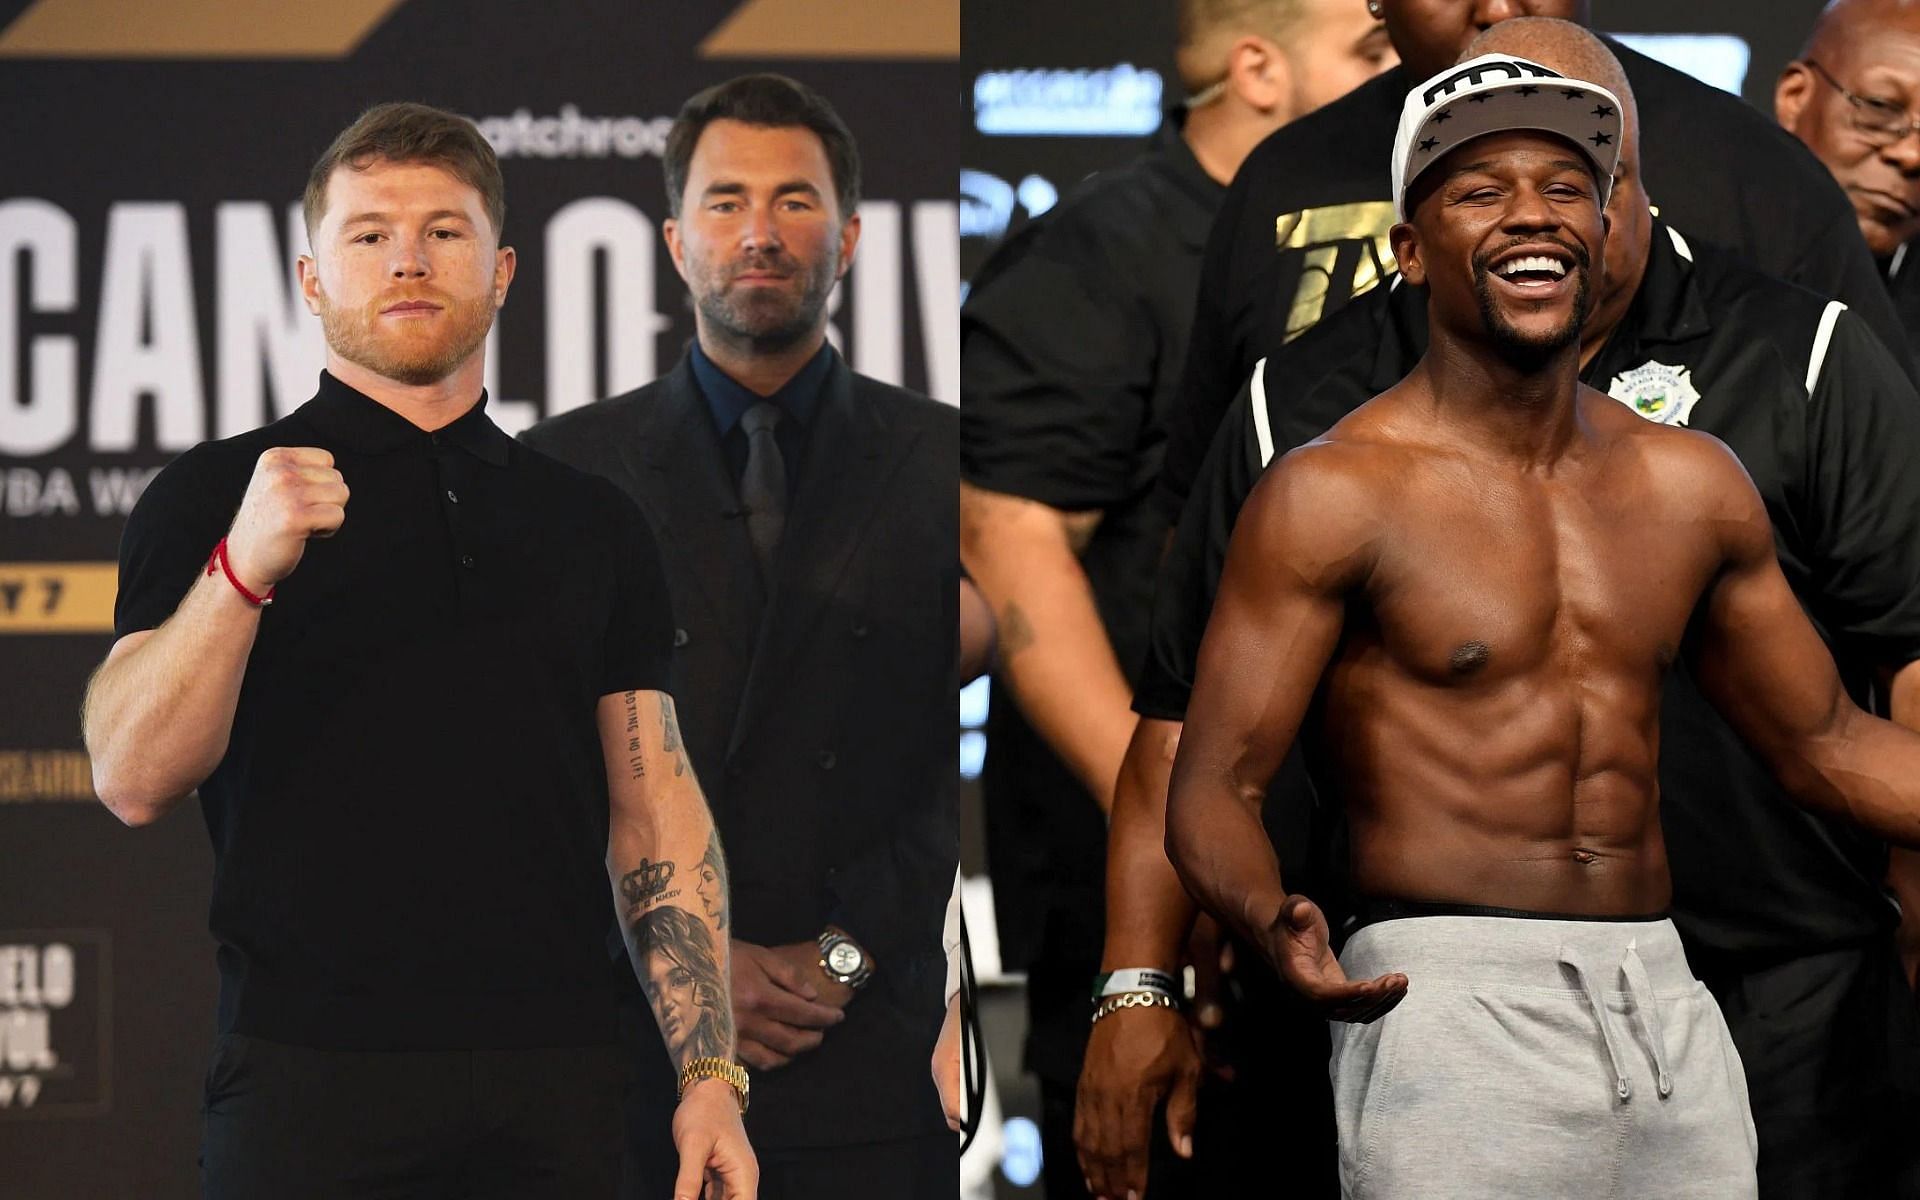 Eddie Hearn seems to believe that Canelo Alvarez (L) would beat Floyd Mayweather (R) in his prime.